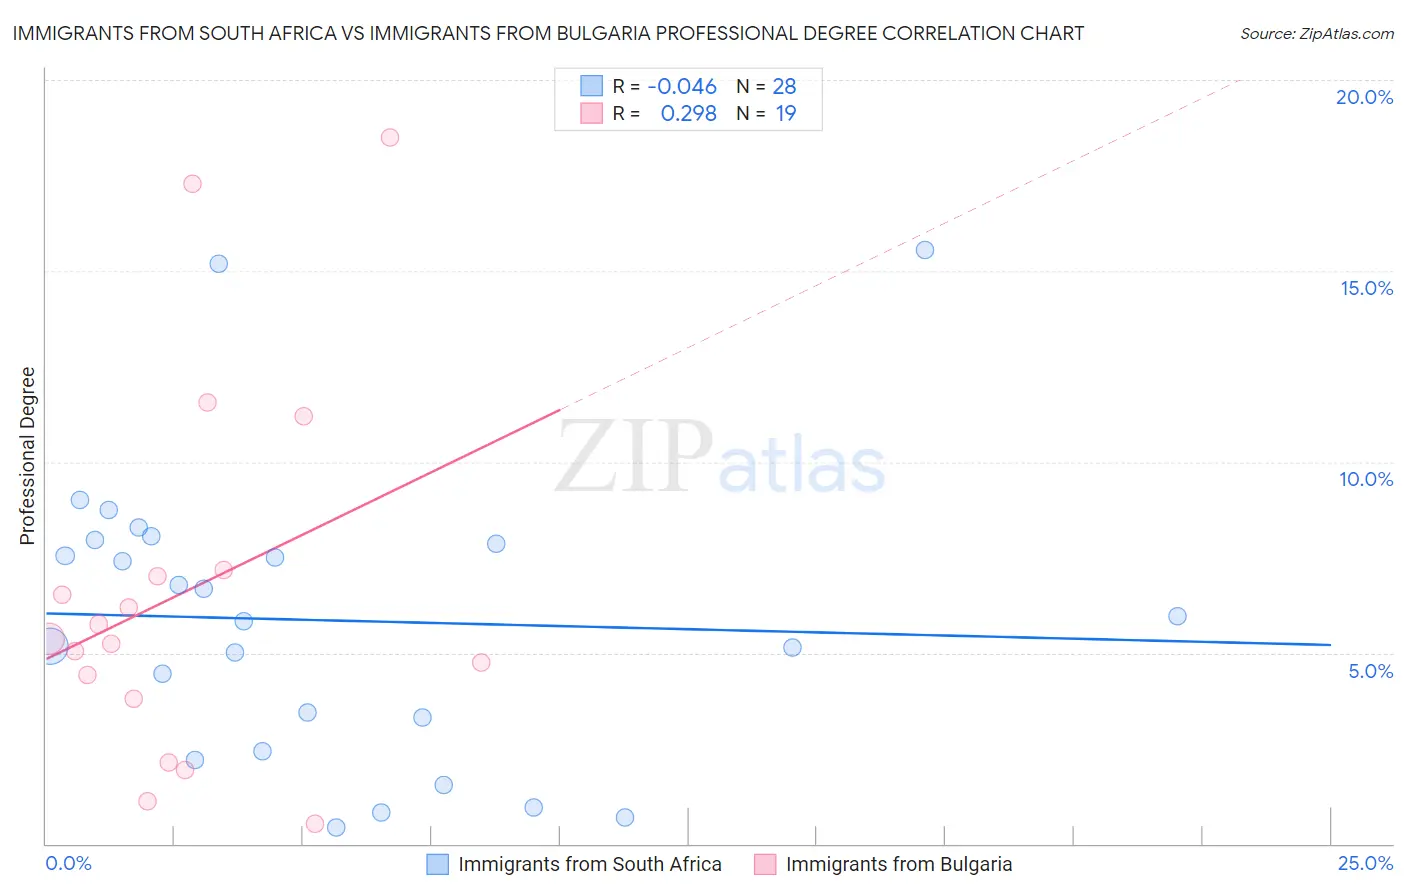 Immigrants from South Africa vs Immigrants from Bulgaria Professional Degree